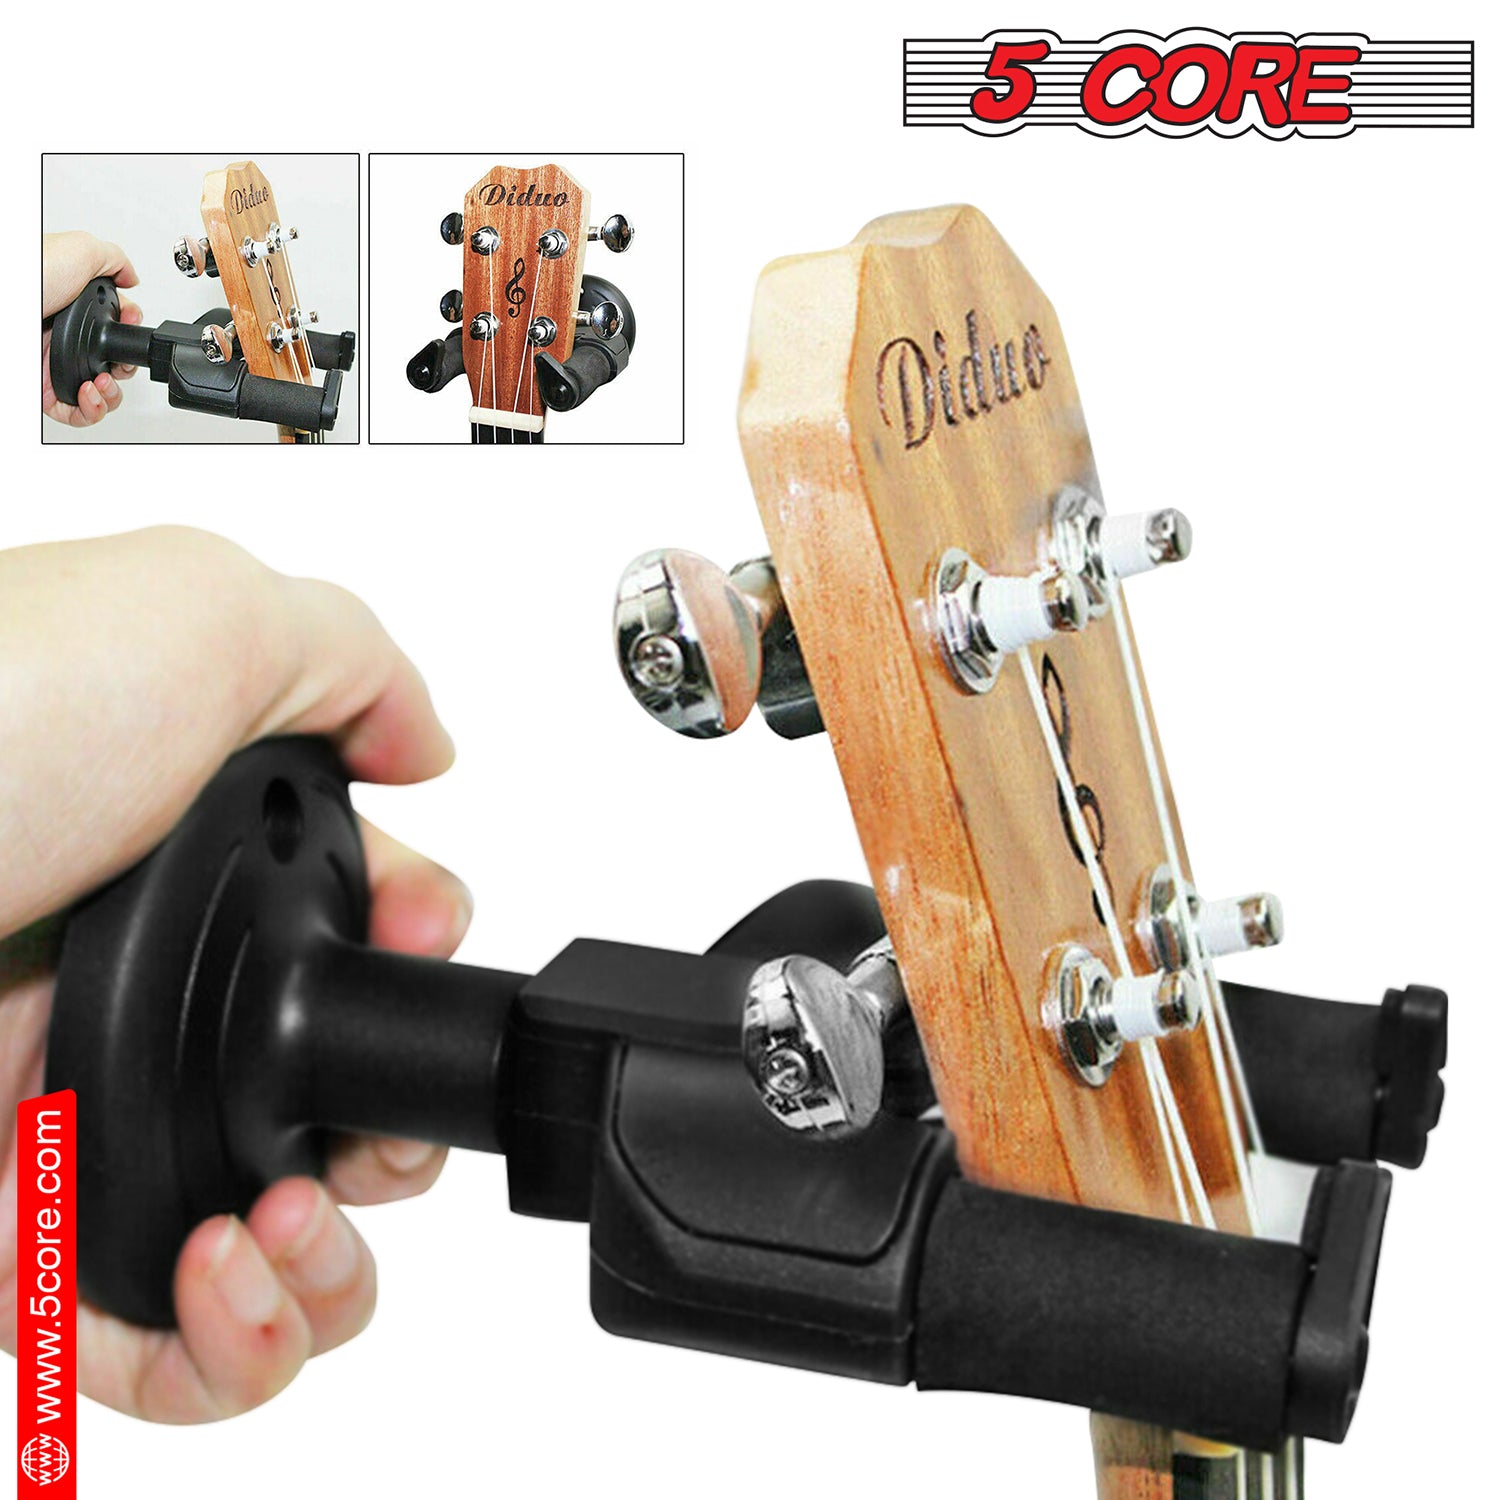 5 Core Guitar Wall Mount Hanger 1Pc Adjustable Rotatable Guitar Wall Holder Hook w Soft Padding